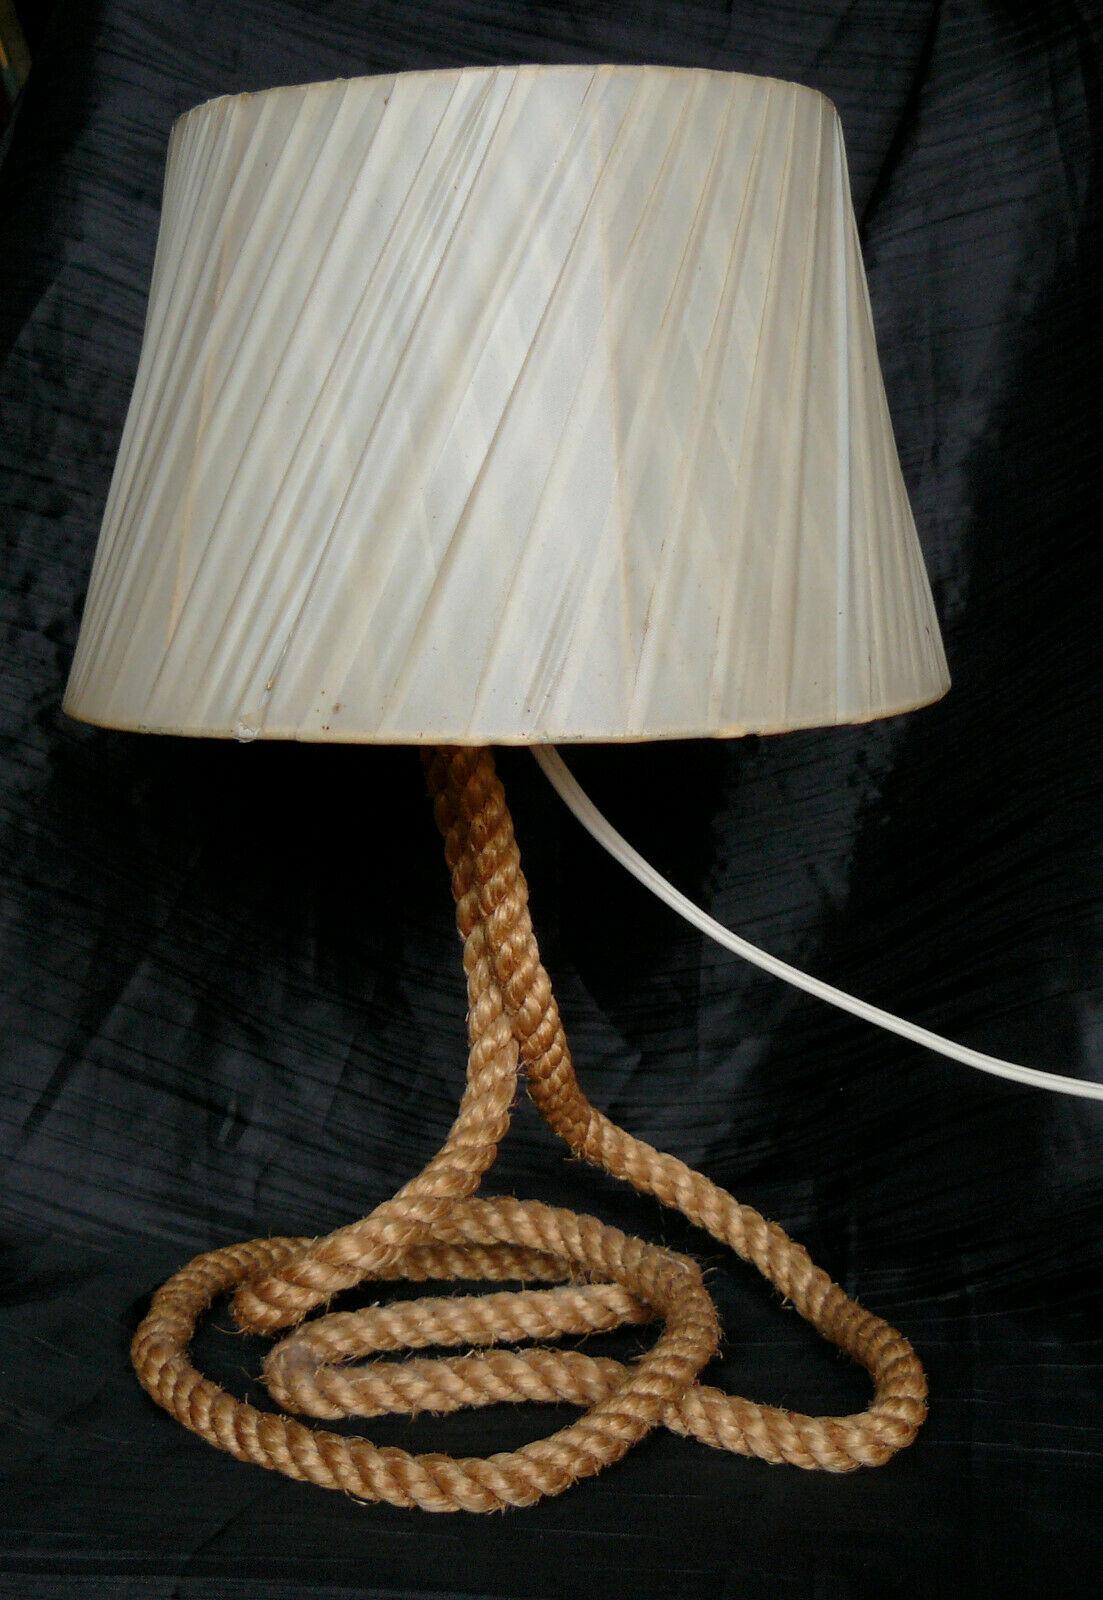 Mid-Century Modern Audoux Minet Rope Table Lamp, 1950 by Adrien Audoux and Frida Minet